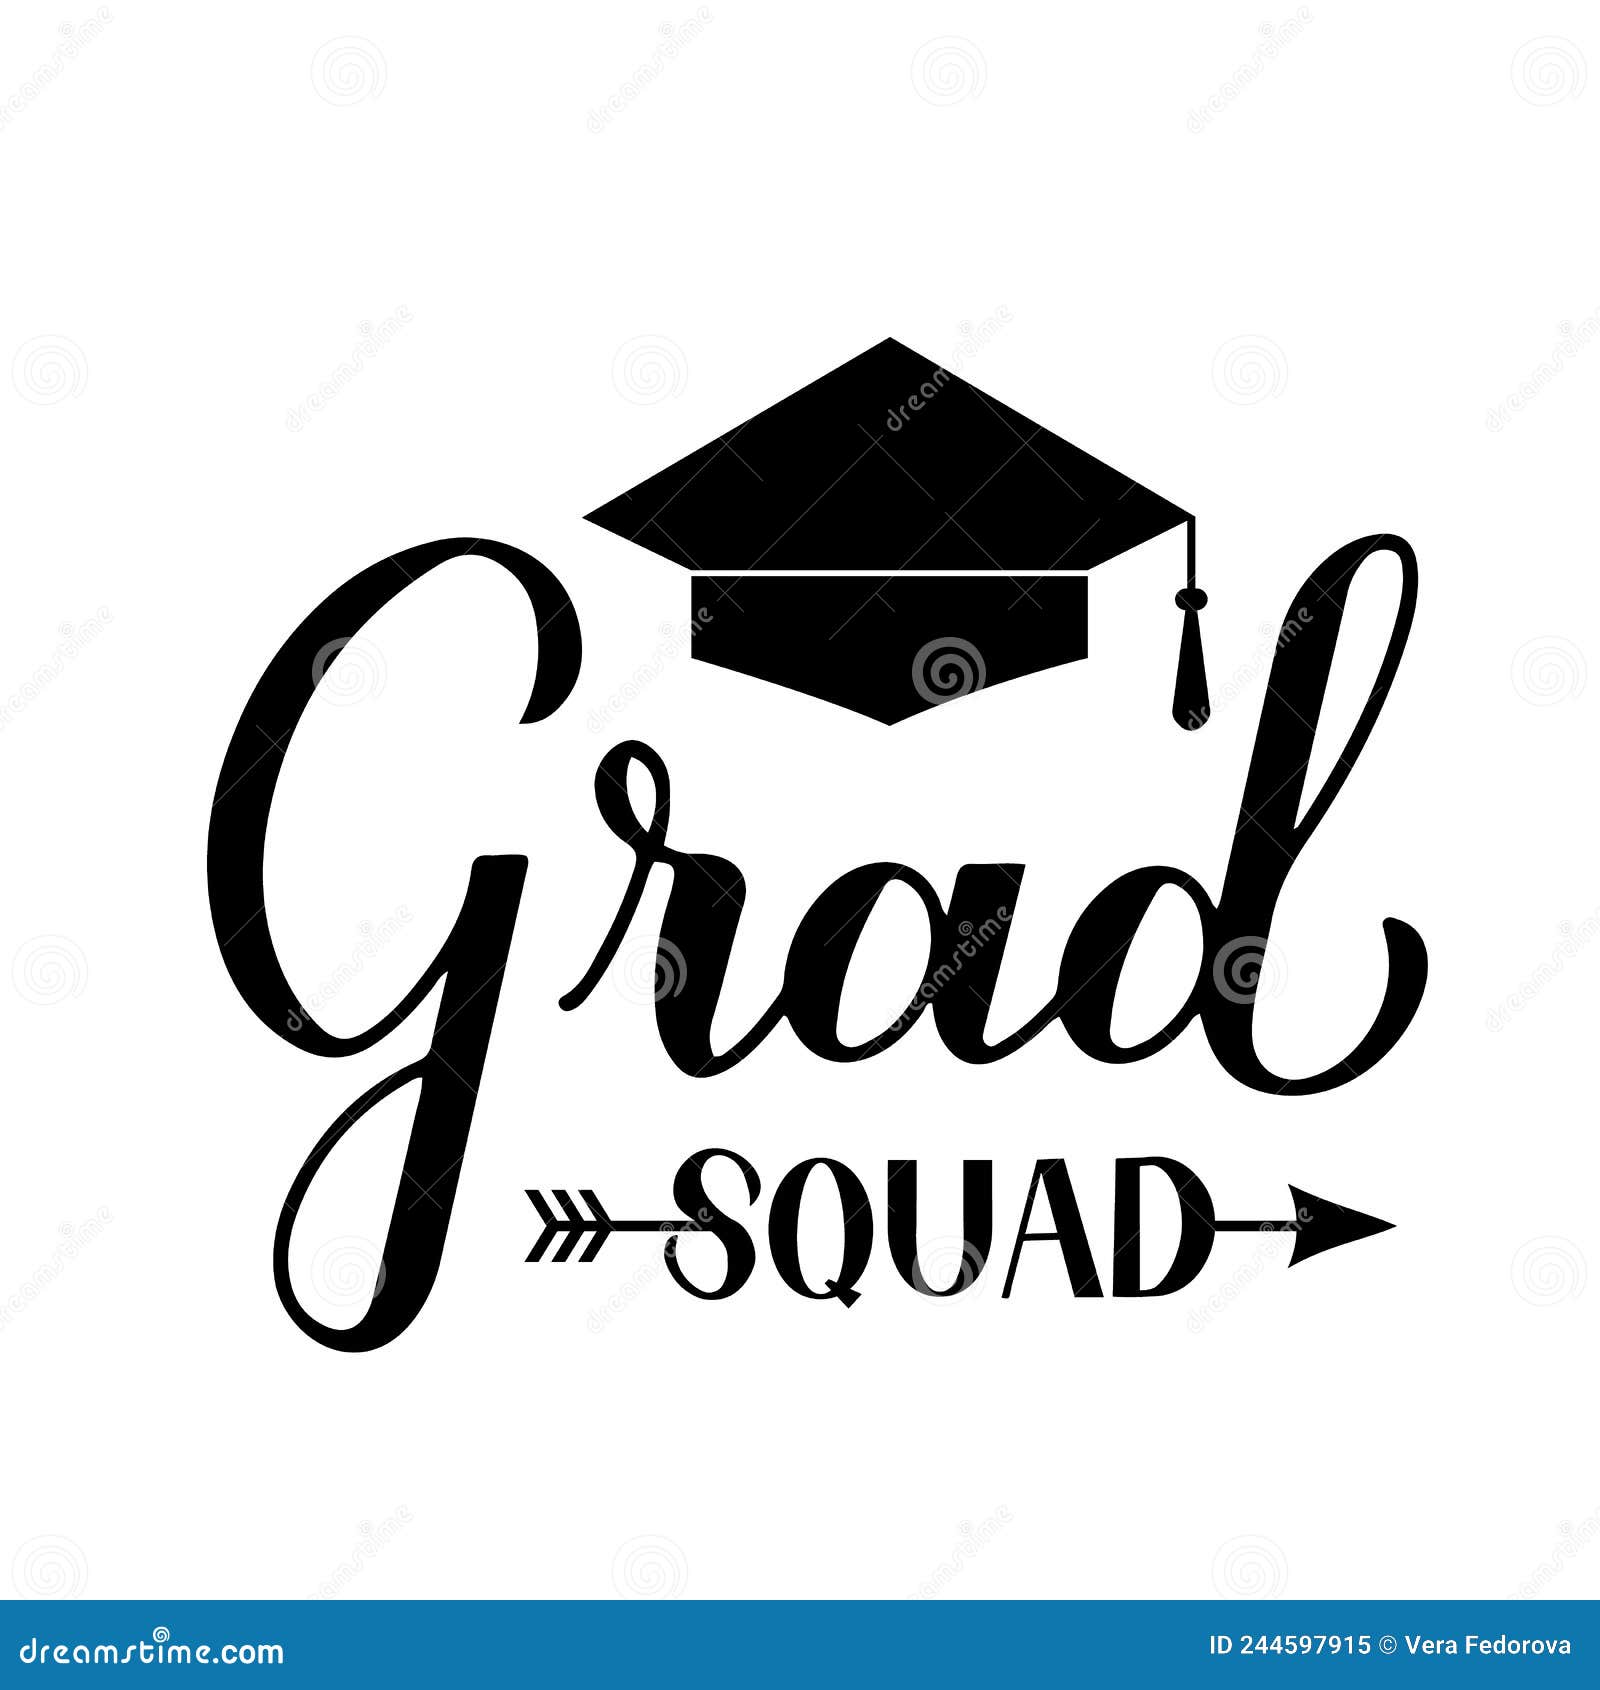 Grad Squad Calligraphy Hand Lettering with Graduation Cap. Funny Graduation  Quote Typography Poster Stock Vector - Illustration of high, background:  244597915